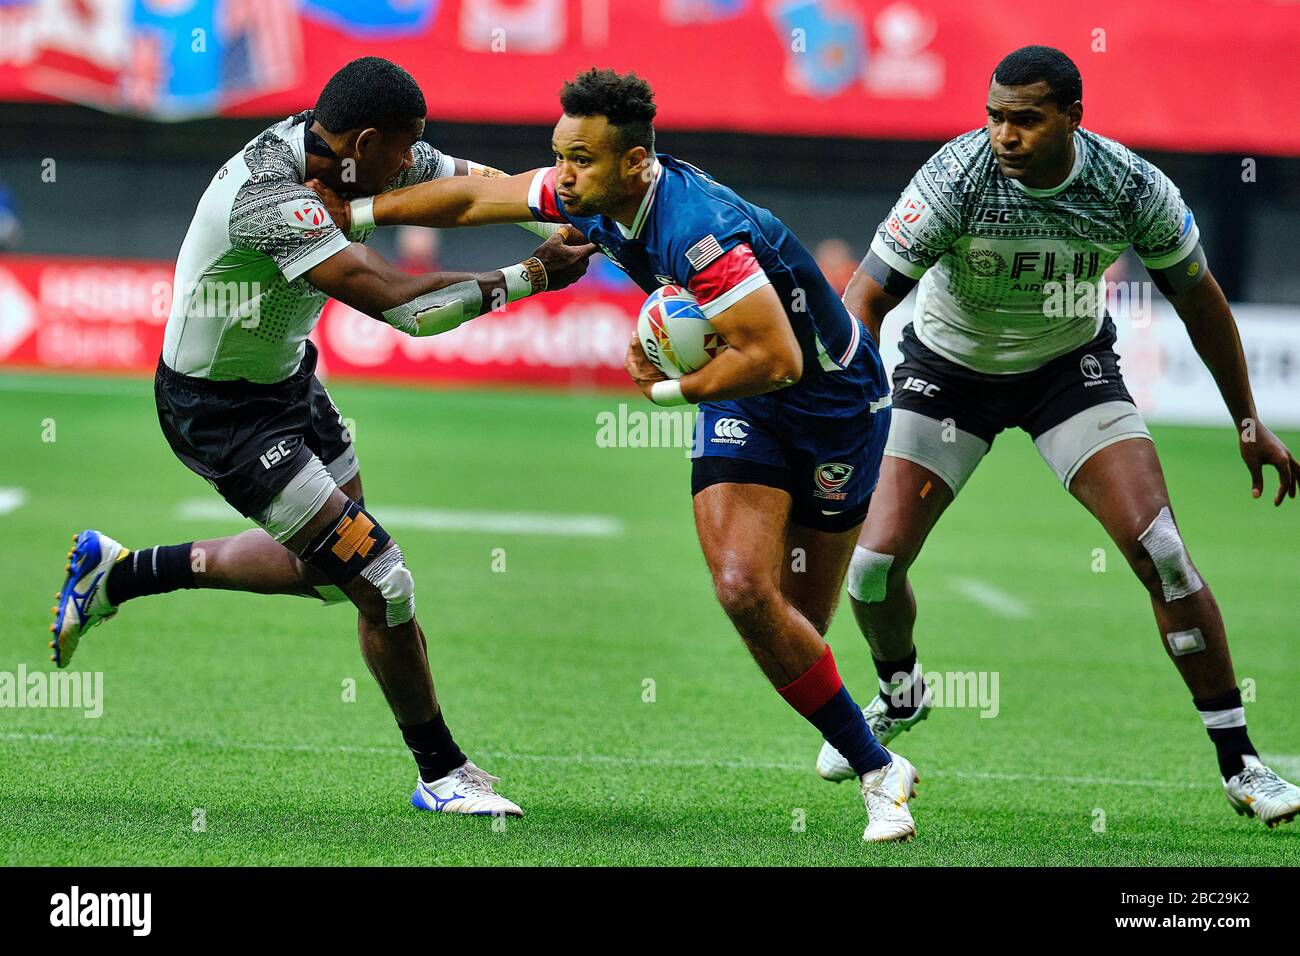 Vancouver, Canada. 8th March, 2020. Maceo Brown #4 of USA tackled by Fiji players in Match #37 (5th Place Semi Final) during Day 2 - 2020 HSBC World R Stock Photo